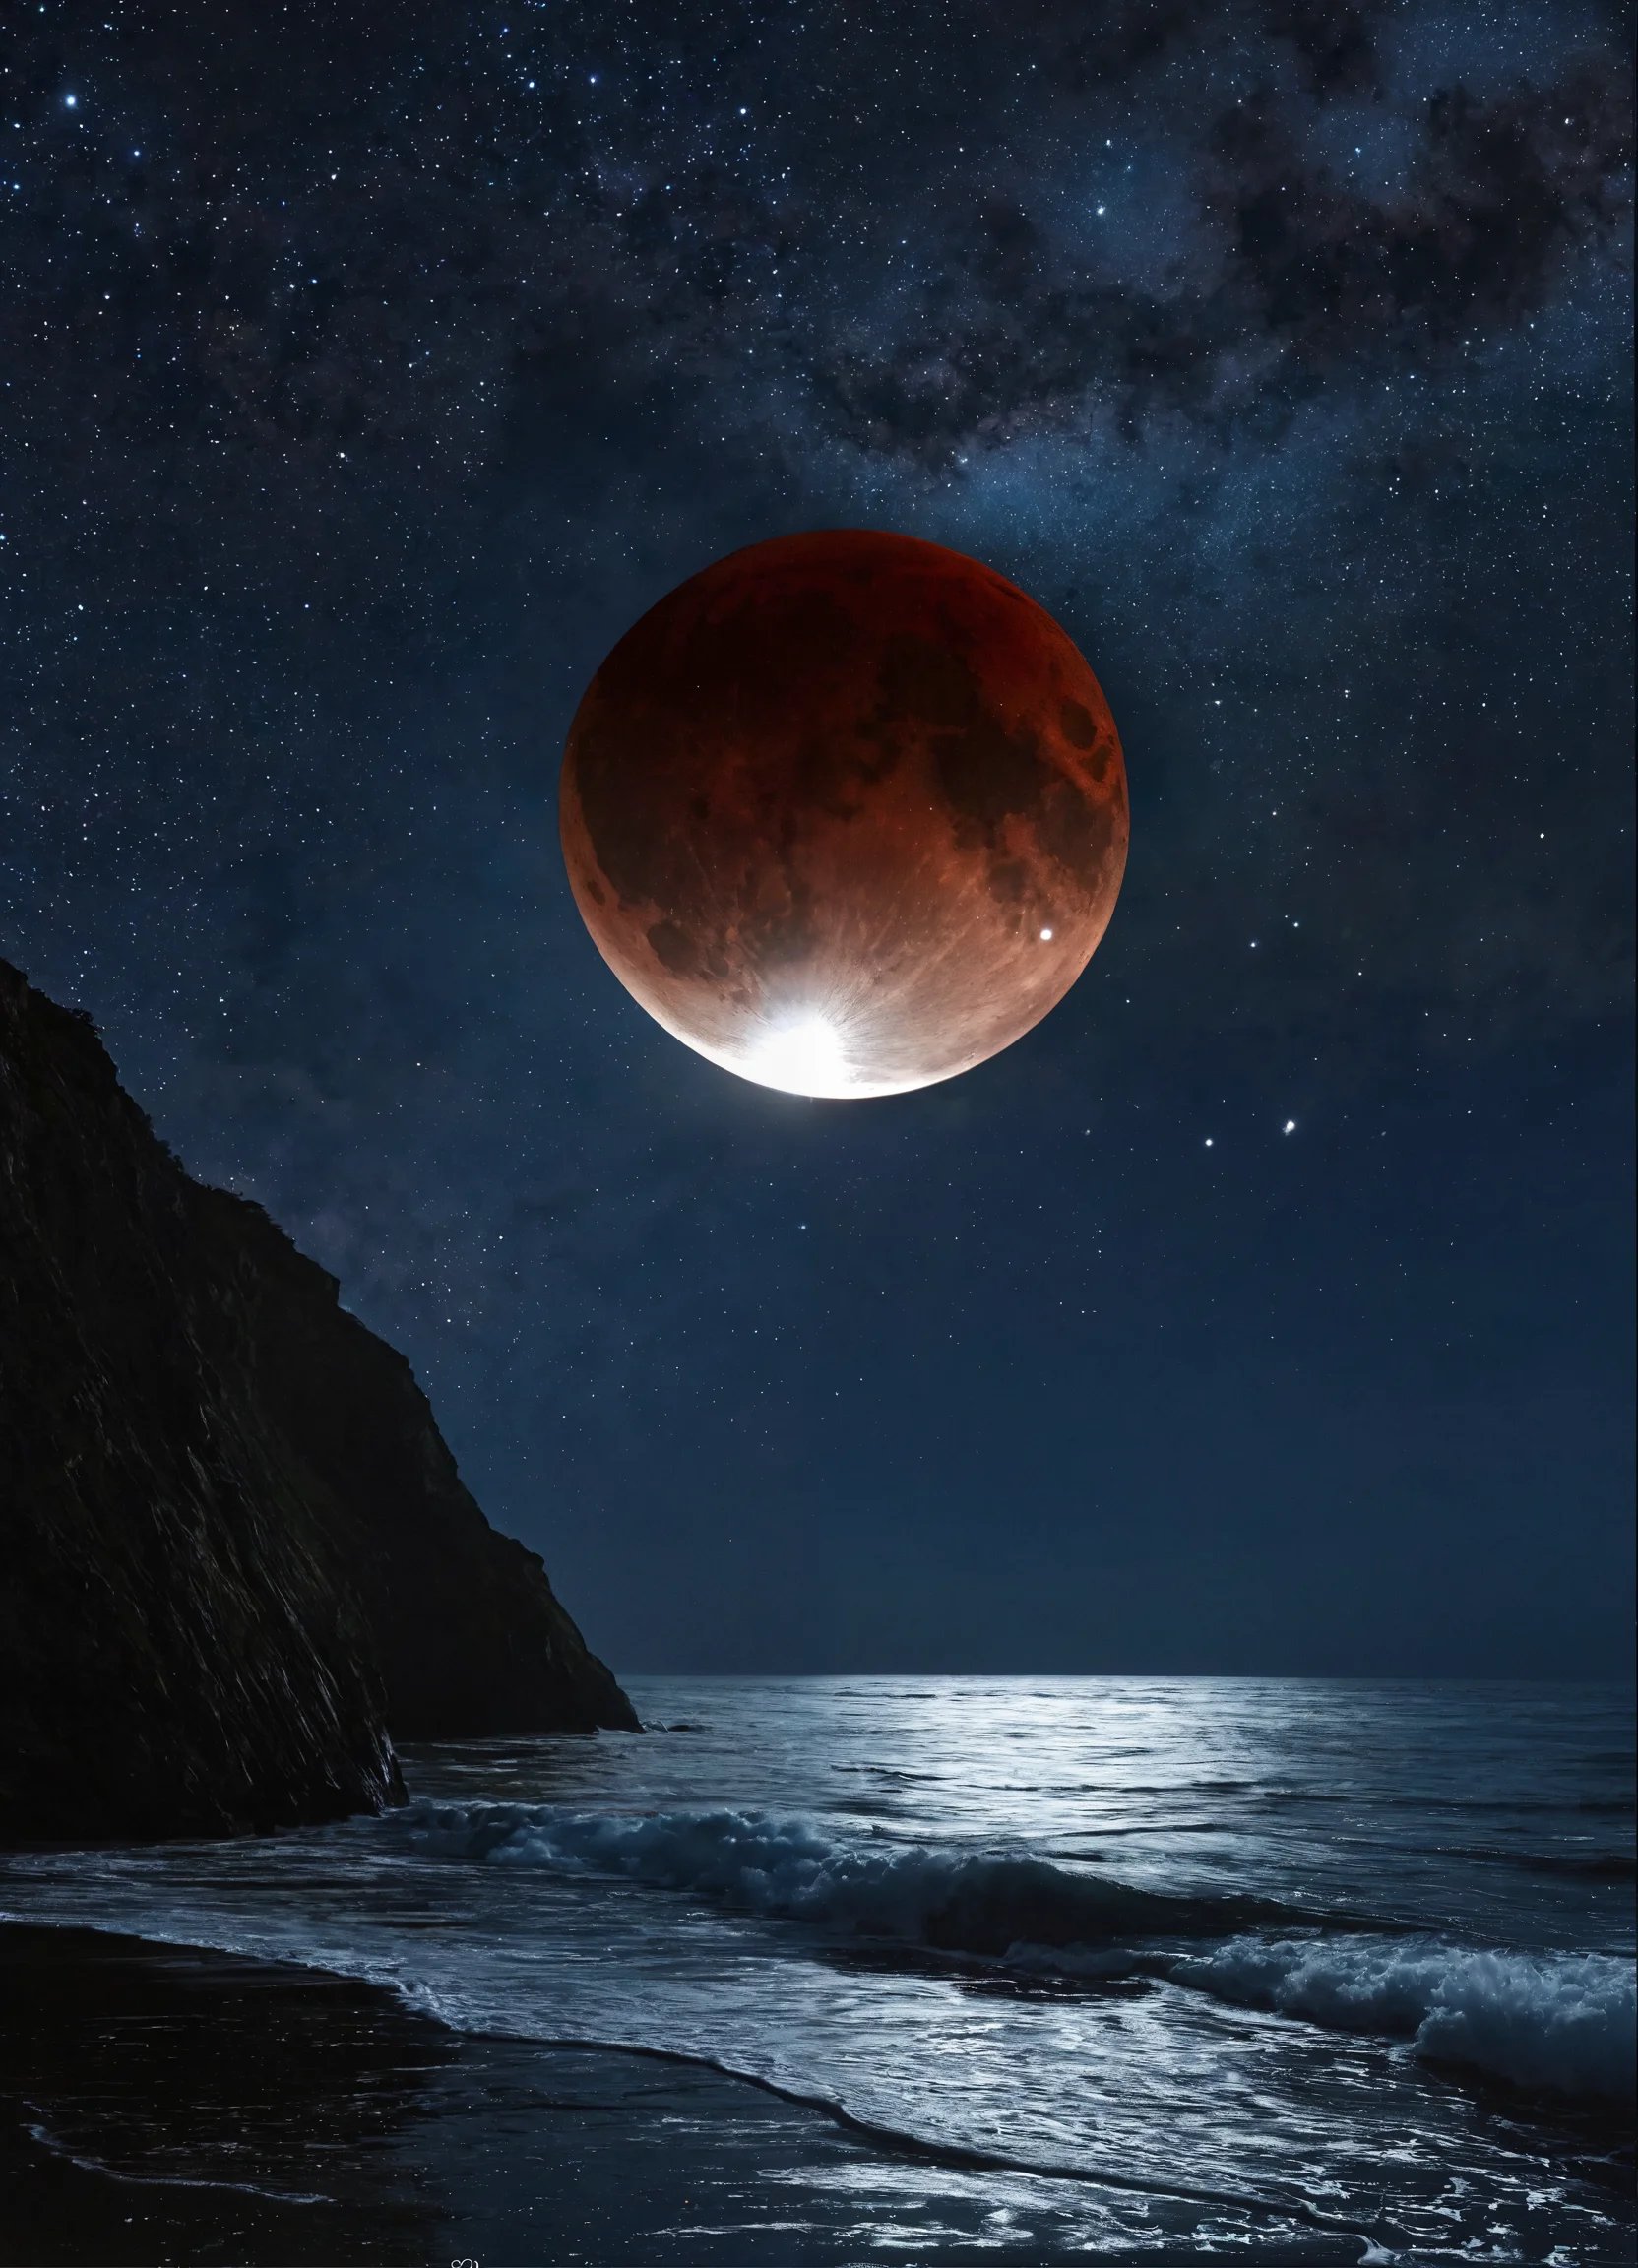 Full Moon and Lunar eclipse on March 25th in Libra.